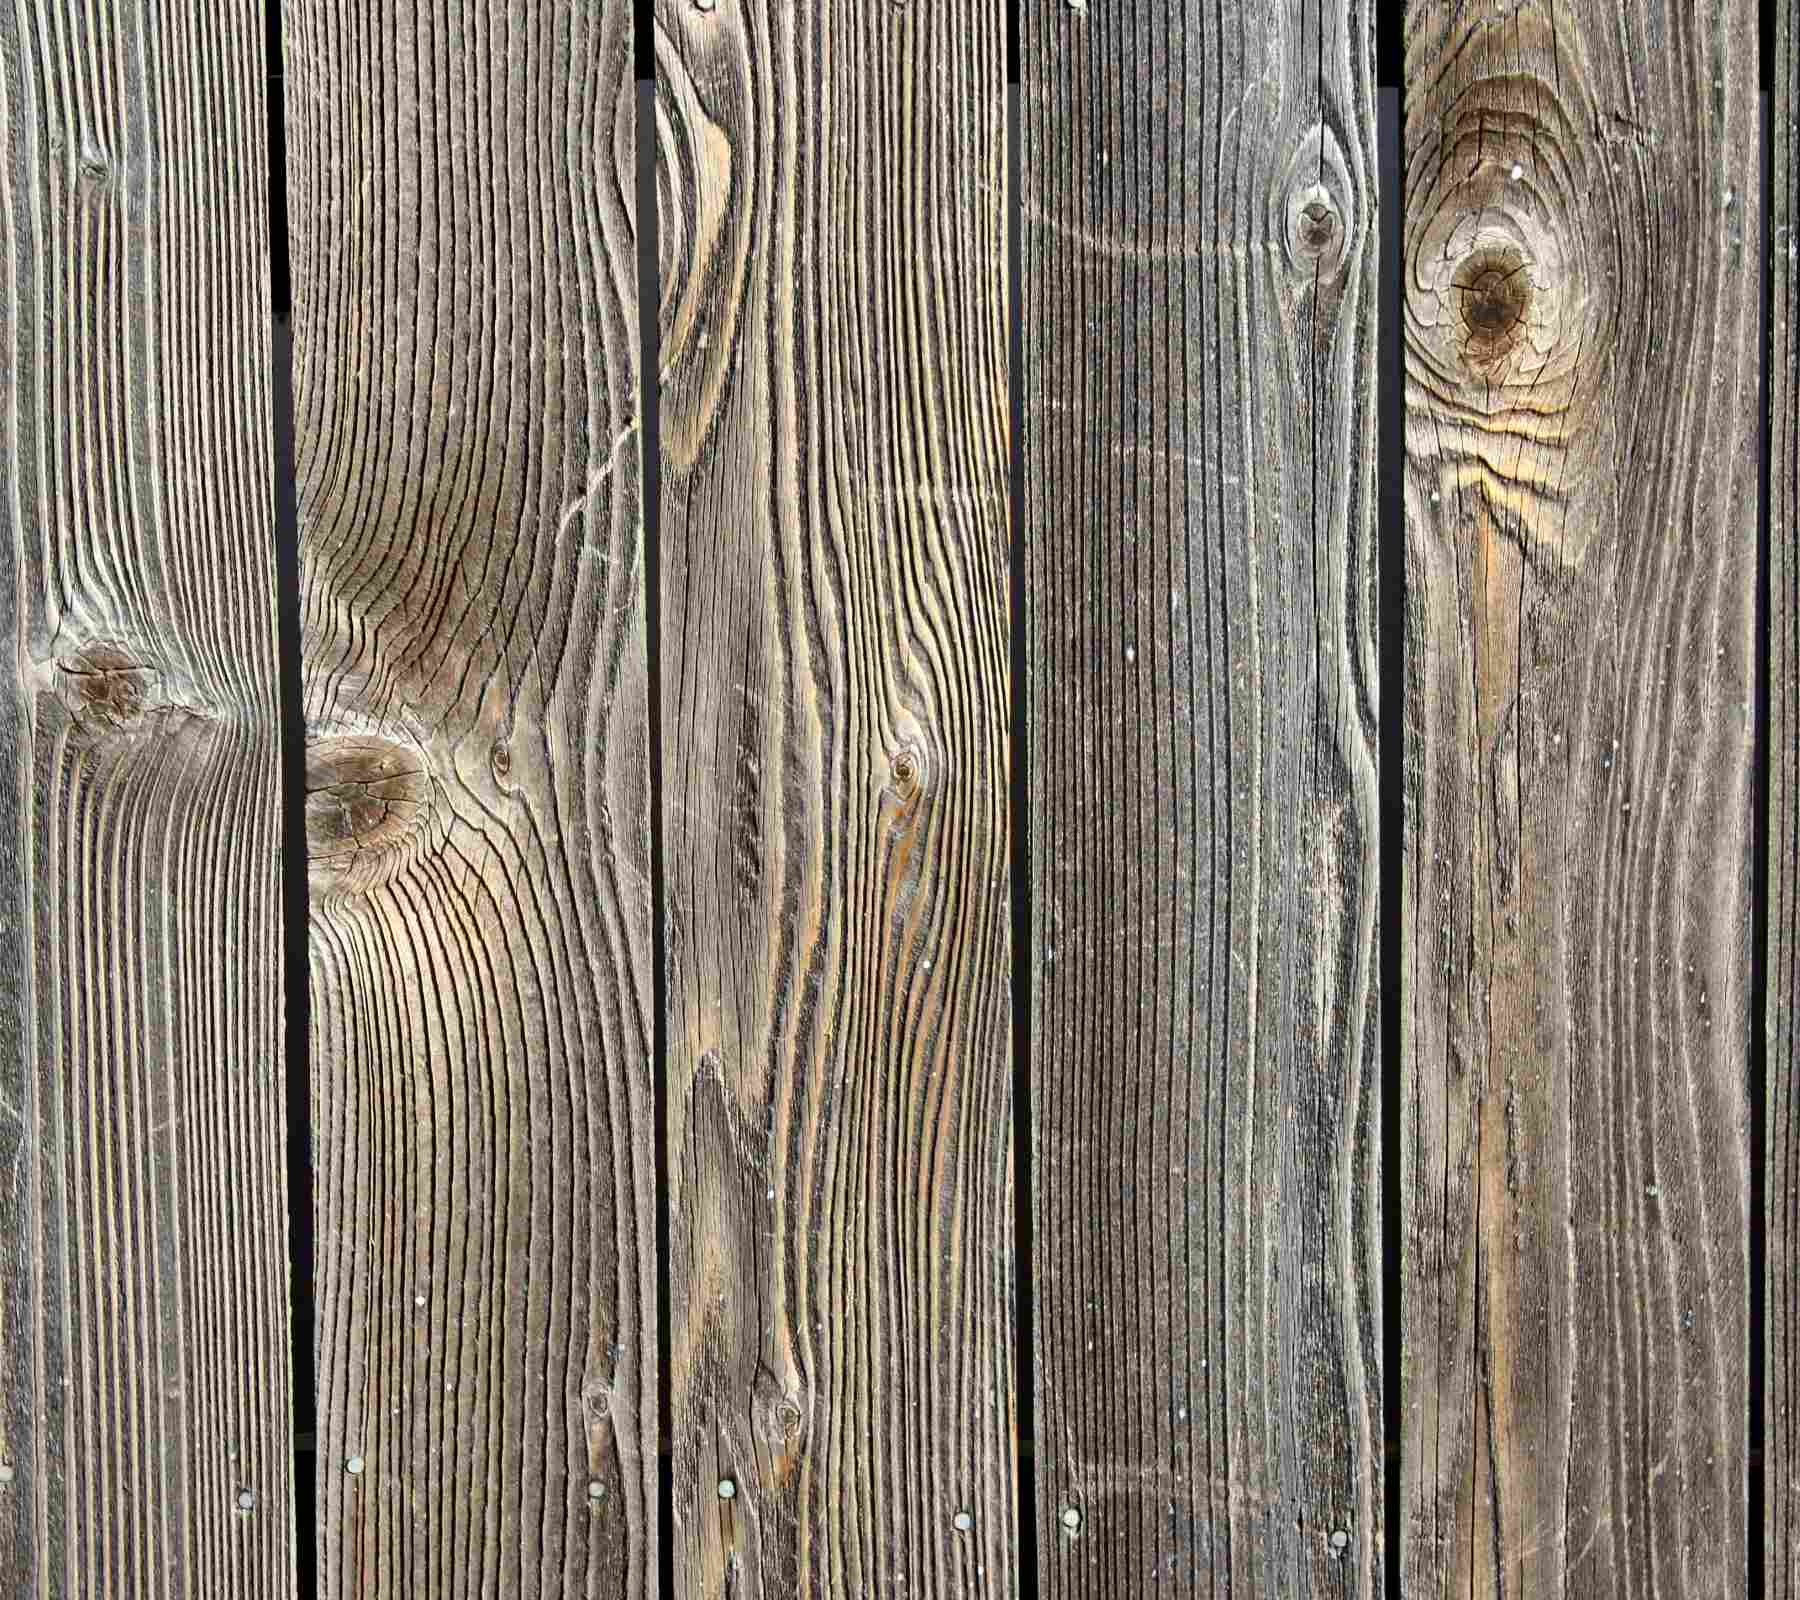 Vintage Wood Wallpaper Wooden Wall Old Country Barn